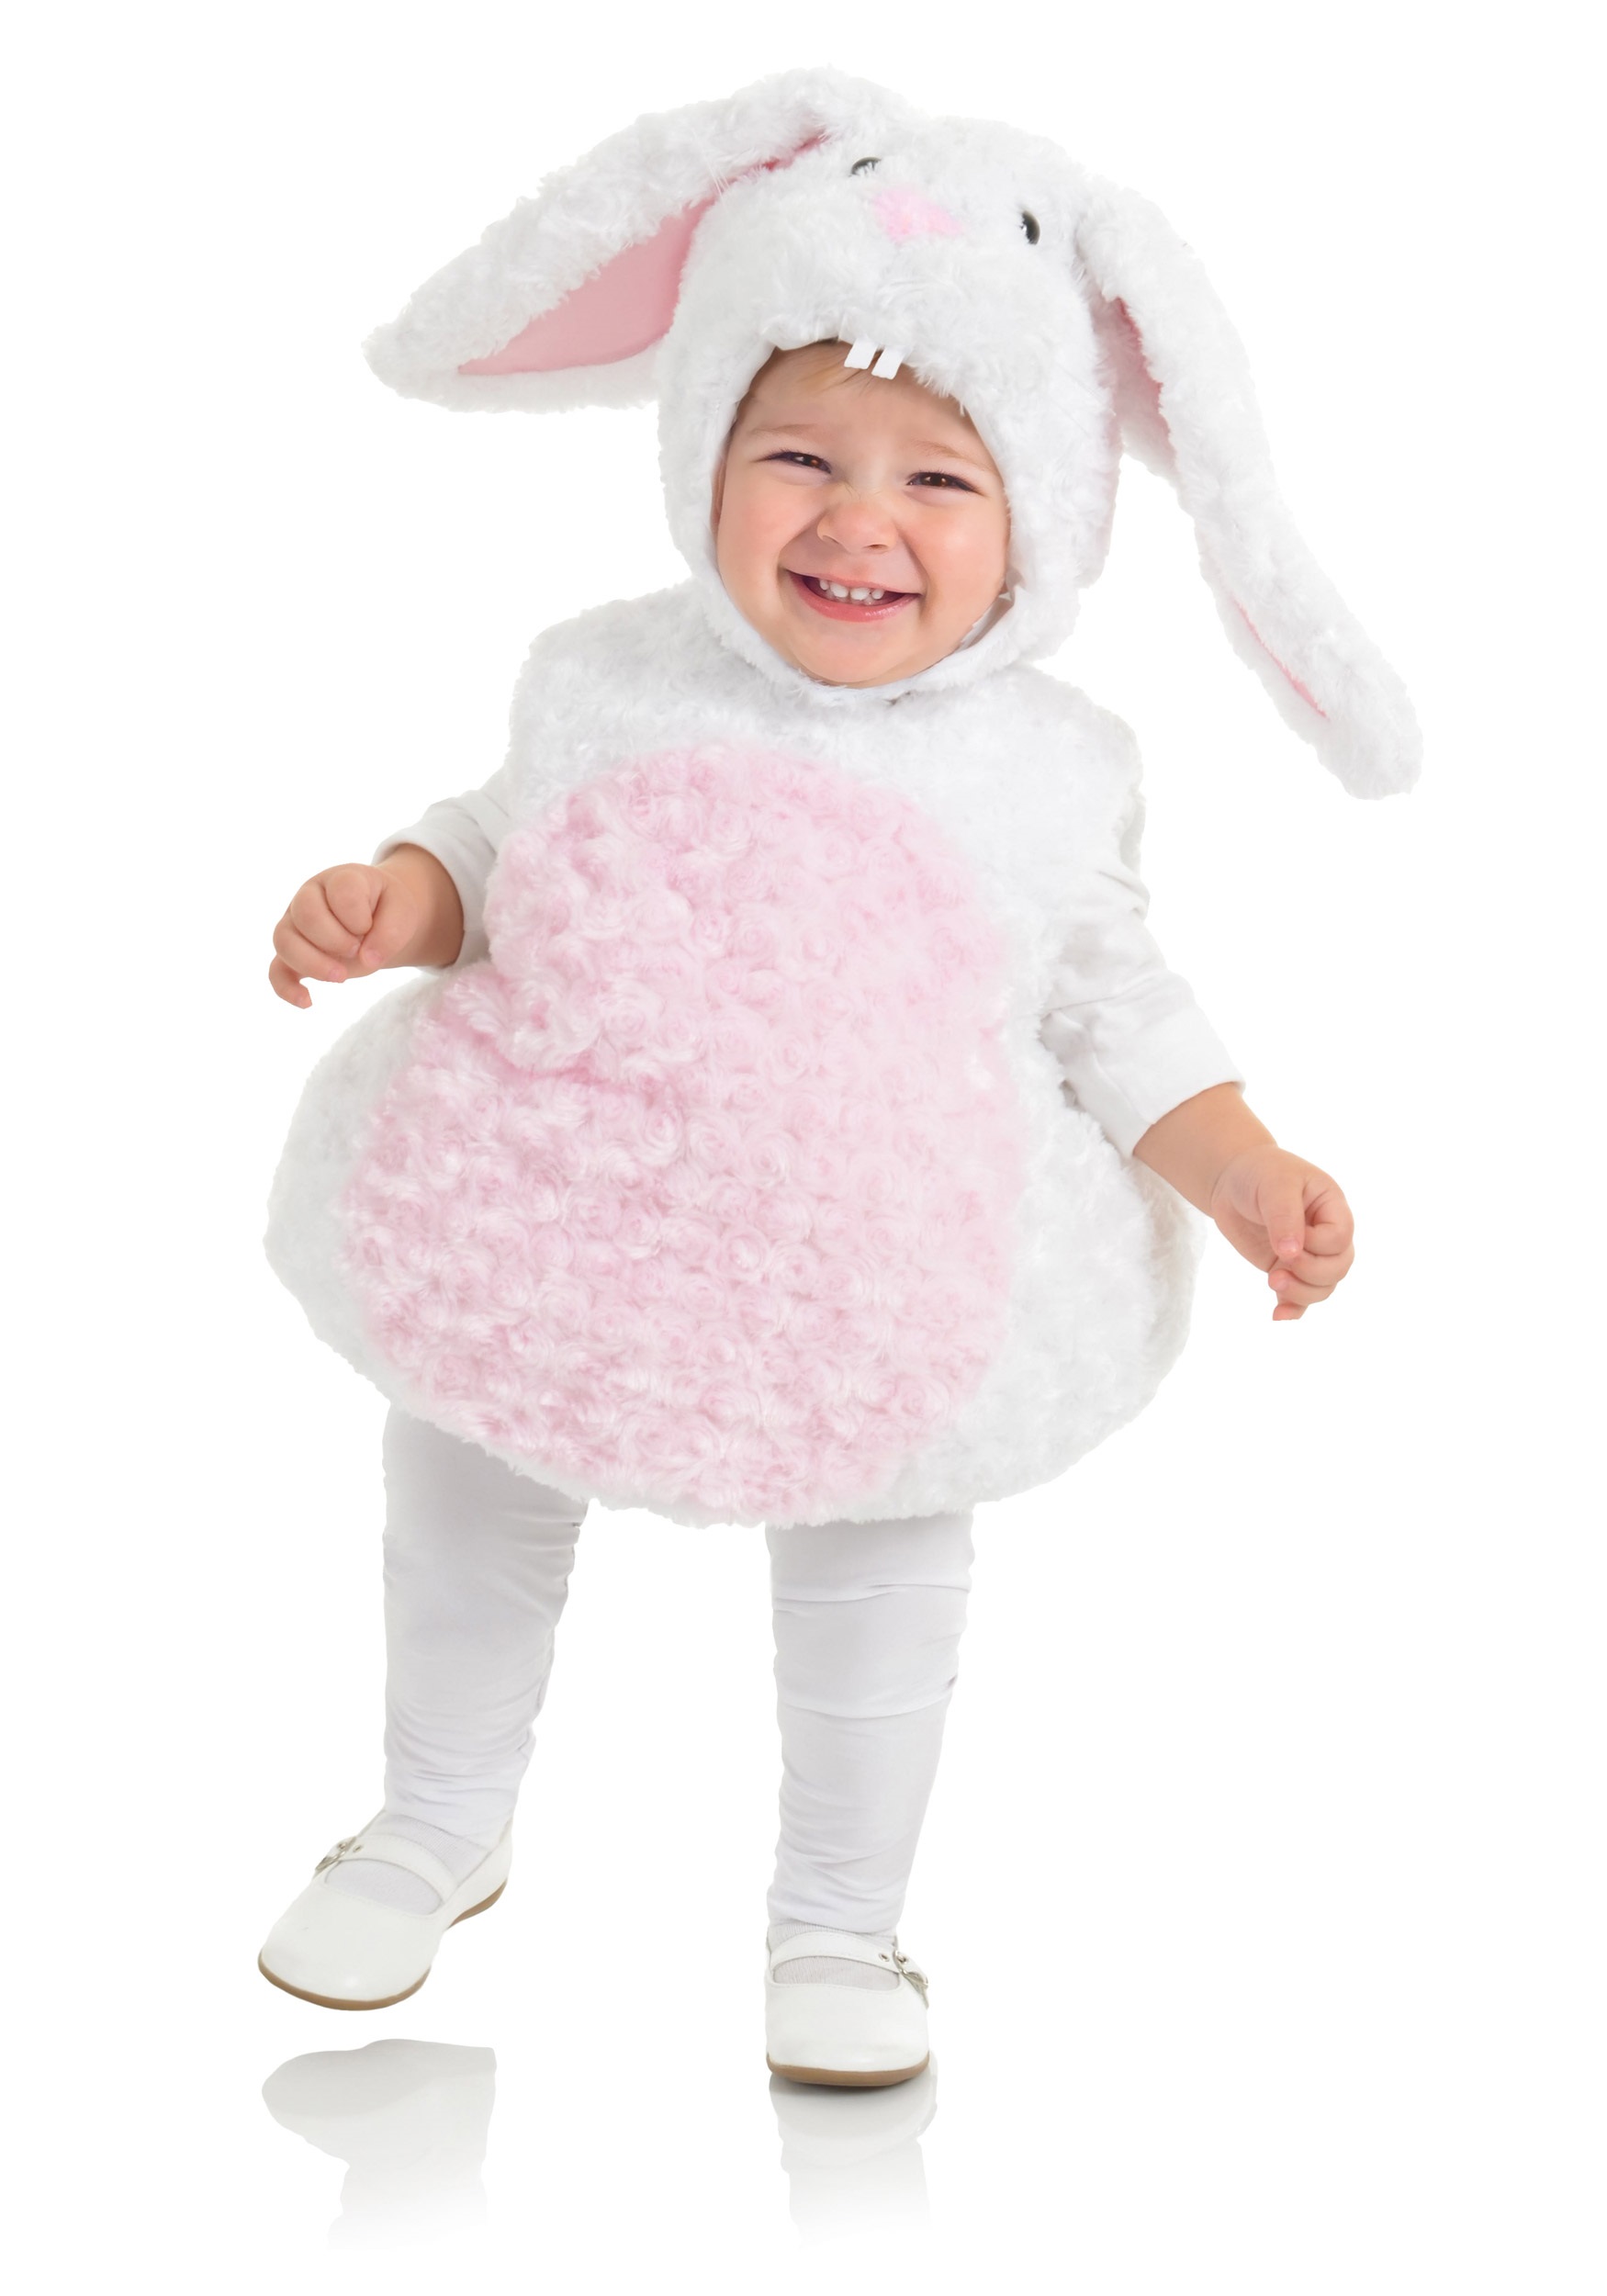 Bunny suit  Bunny Outfit Toddler Costume Pink Bunny drss up Easter gift